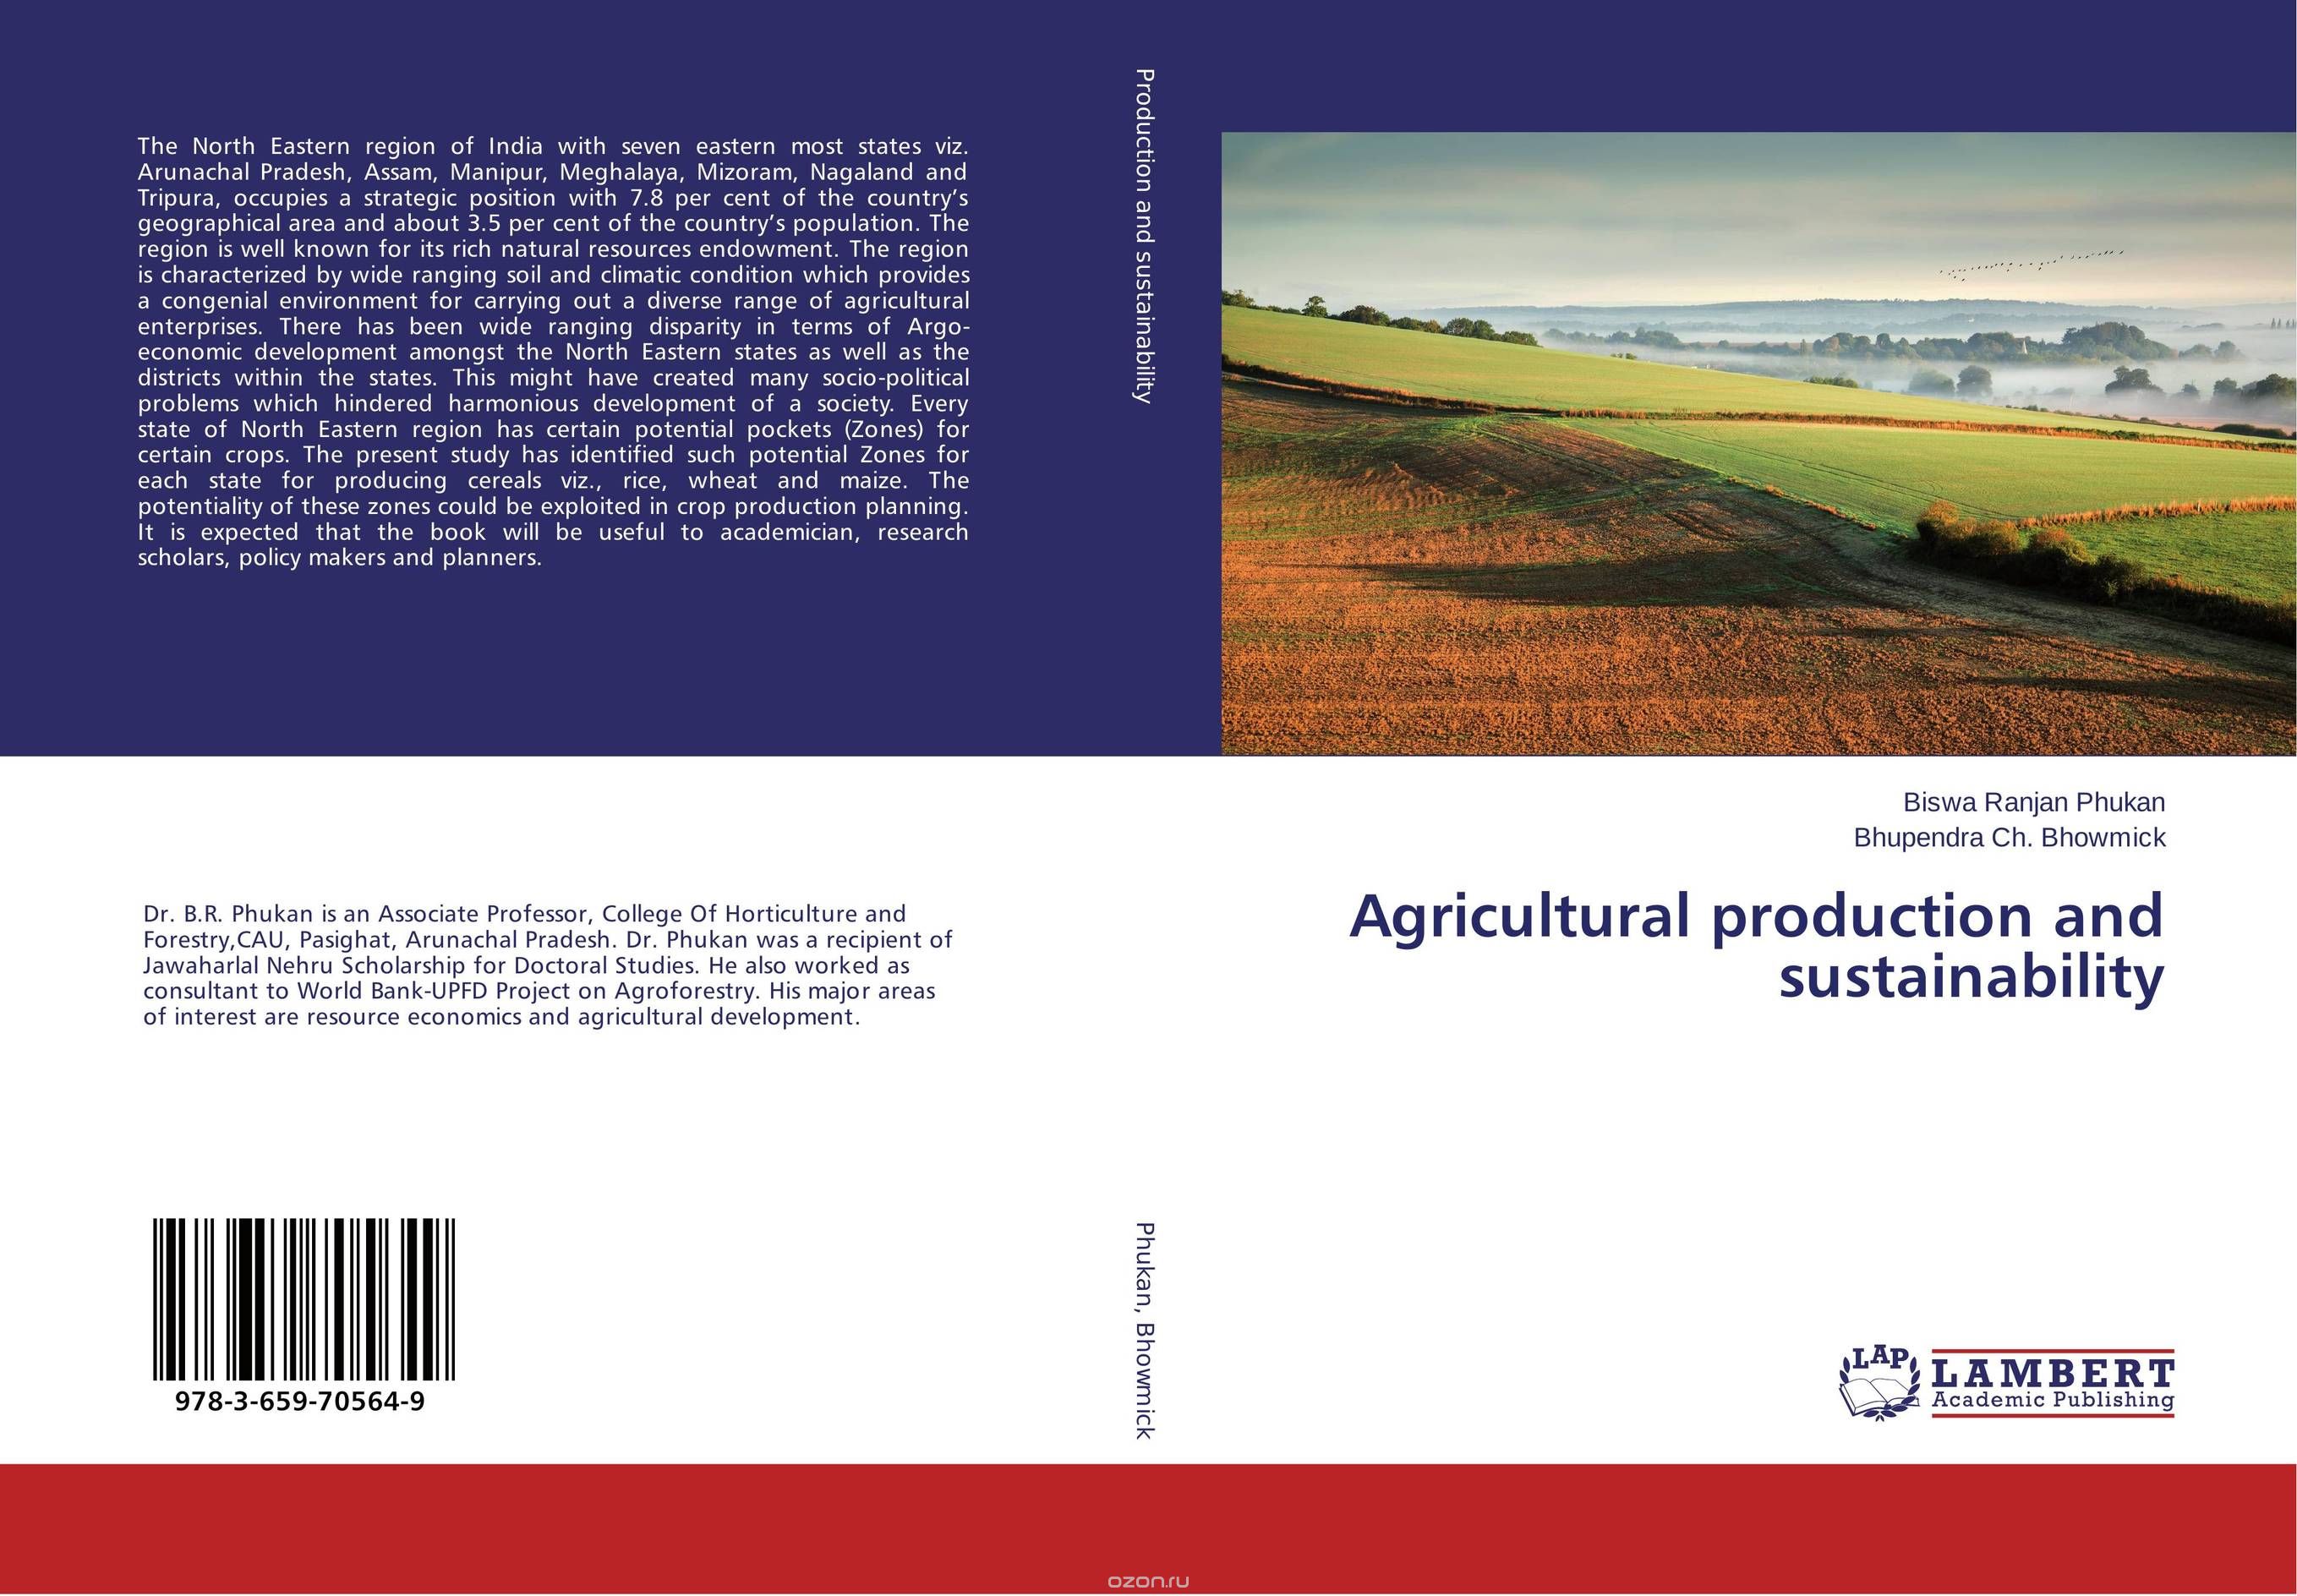 Скачать книгу "Agricultural production and sustainability"